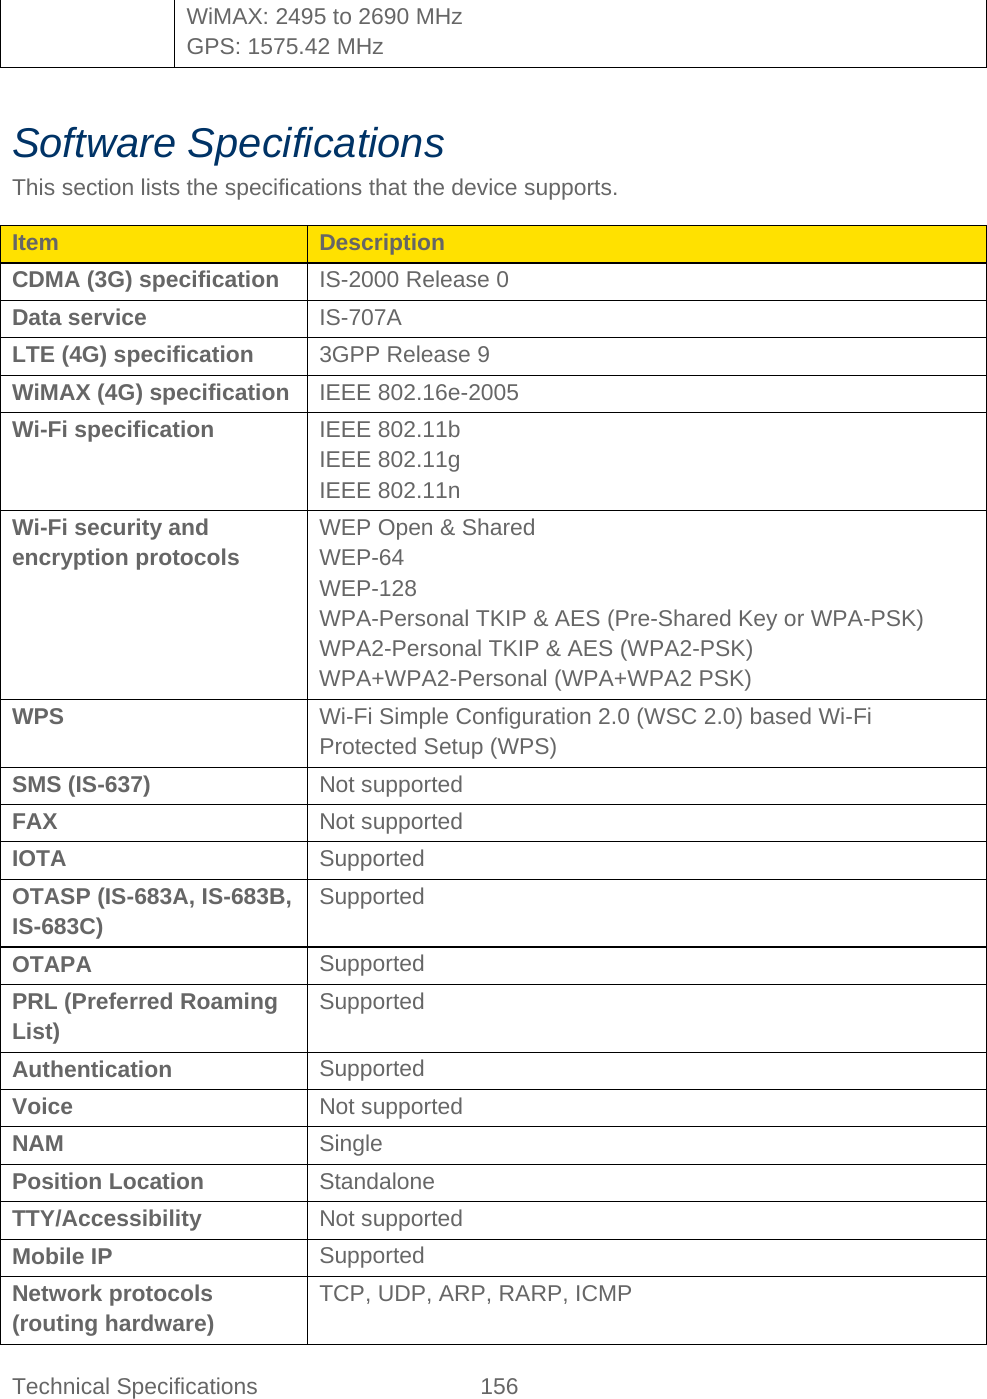 Technical Specifications 156   WiMAX: 2495 to 2690 MHz GPS: 1575.42 MHz  Software Specifications This section lists the specifications that the device supports. Item Description CDMA (3G) specification IS-2000 Release 0 Data service IS-707A LTE (4G) specification 3GPP Release 9 WiMAX (4G) specification IEEE 802.16e-2005 Wi-Fi specification IEEE 802.11b IEEE 802.11g IEEE 802.11n Wi-Fi security and encryption protocols WEP Open &amp; Shared WEP-64 WEP-128 WPA-Personal TKIP &amp; AES (Pre-Shared Key or WPA-PSK) WPA2-Personal TKIP &amp; AES (WPA2-PSK) WPA+WPA2-Personal (WPA+WPA2 PSK) WPS Wi-Fi Simple Configuration 2.0 (WSC 2.0) based Wi-Fi Protected Setup (WPS) SMS (IS-637) Not supported FAX Not supported IOTA Supported OTASP (IS-683A, IS-683B, IS-683C) Supported OTAPA Supported PRL (Preferred Roaming List) Supported Authentication Supported Voice Not supported NAM Single Position Location Standalone TTY/Accessibility Not supported Mobile IP Supported Network protocols (routing hardware) TCP, UDP, ARP, RARP, ICMP  